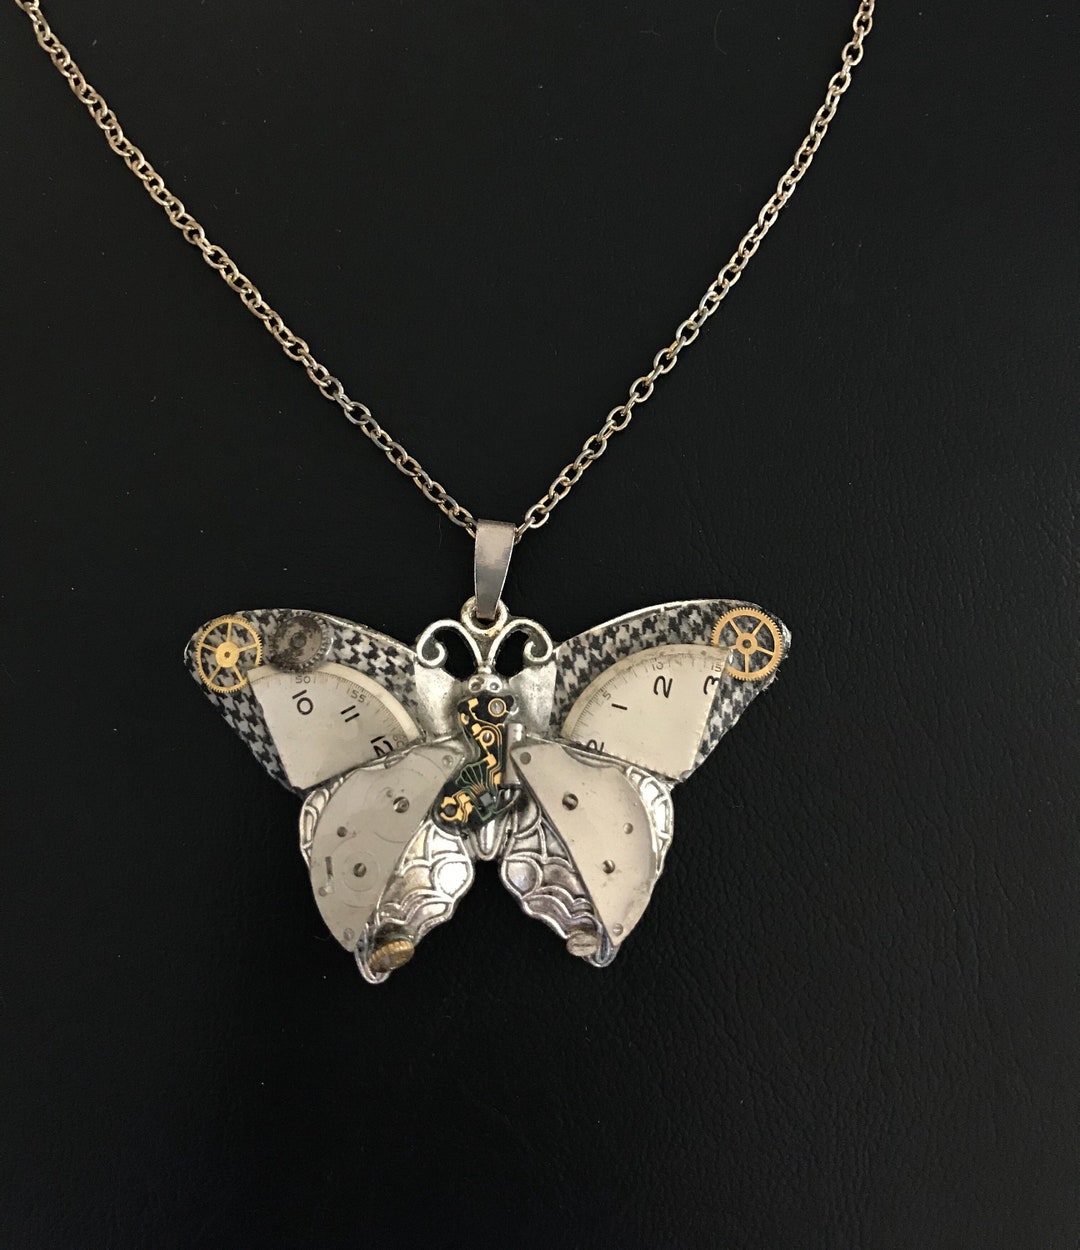 Steampunk Necklace, Steampunk Butterfly Necklace, With Vintage ...